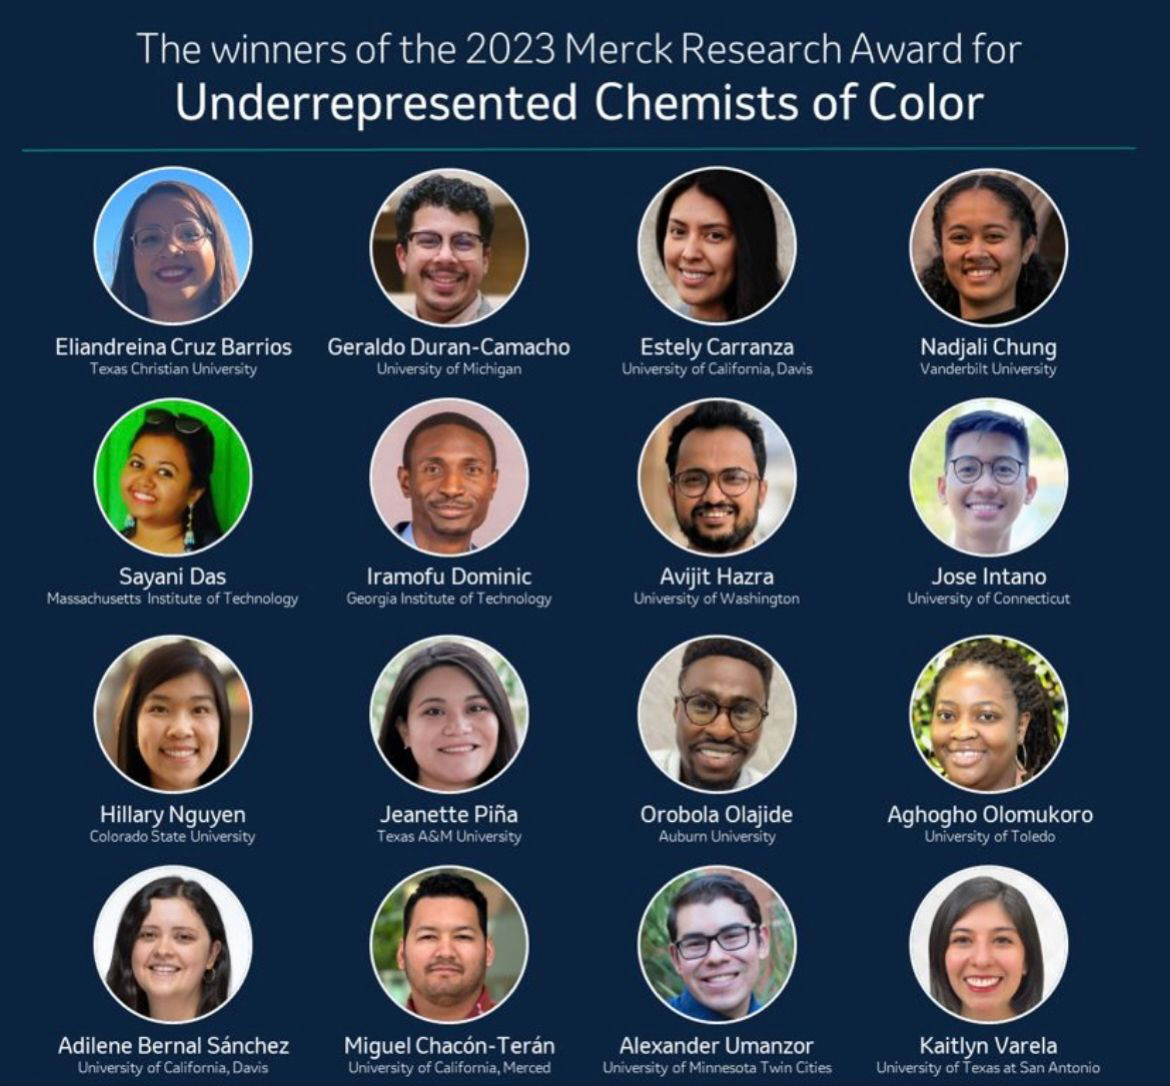 Graphic featuring thumbnail images and names of the 2023 Merck Research Award for Underrepresented Chemists of Color recipients